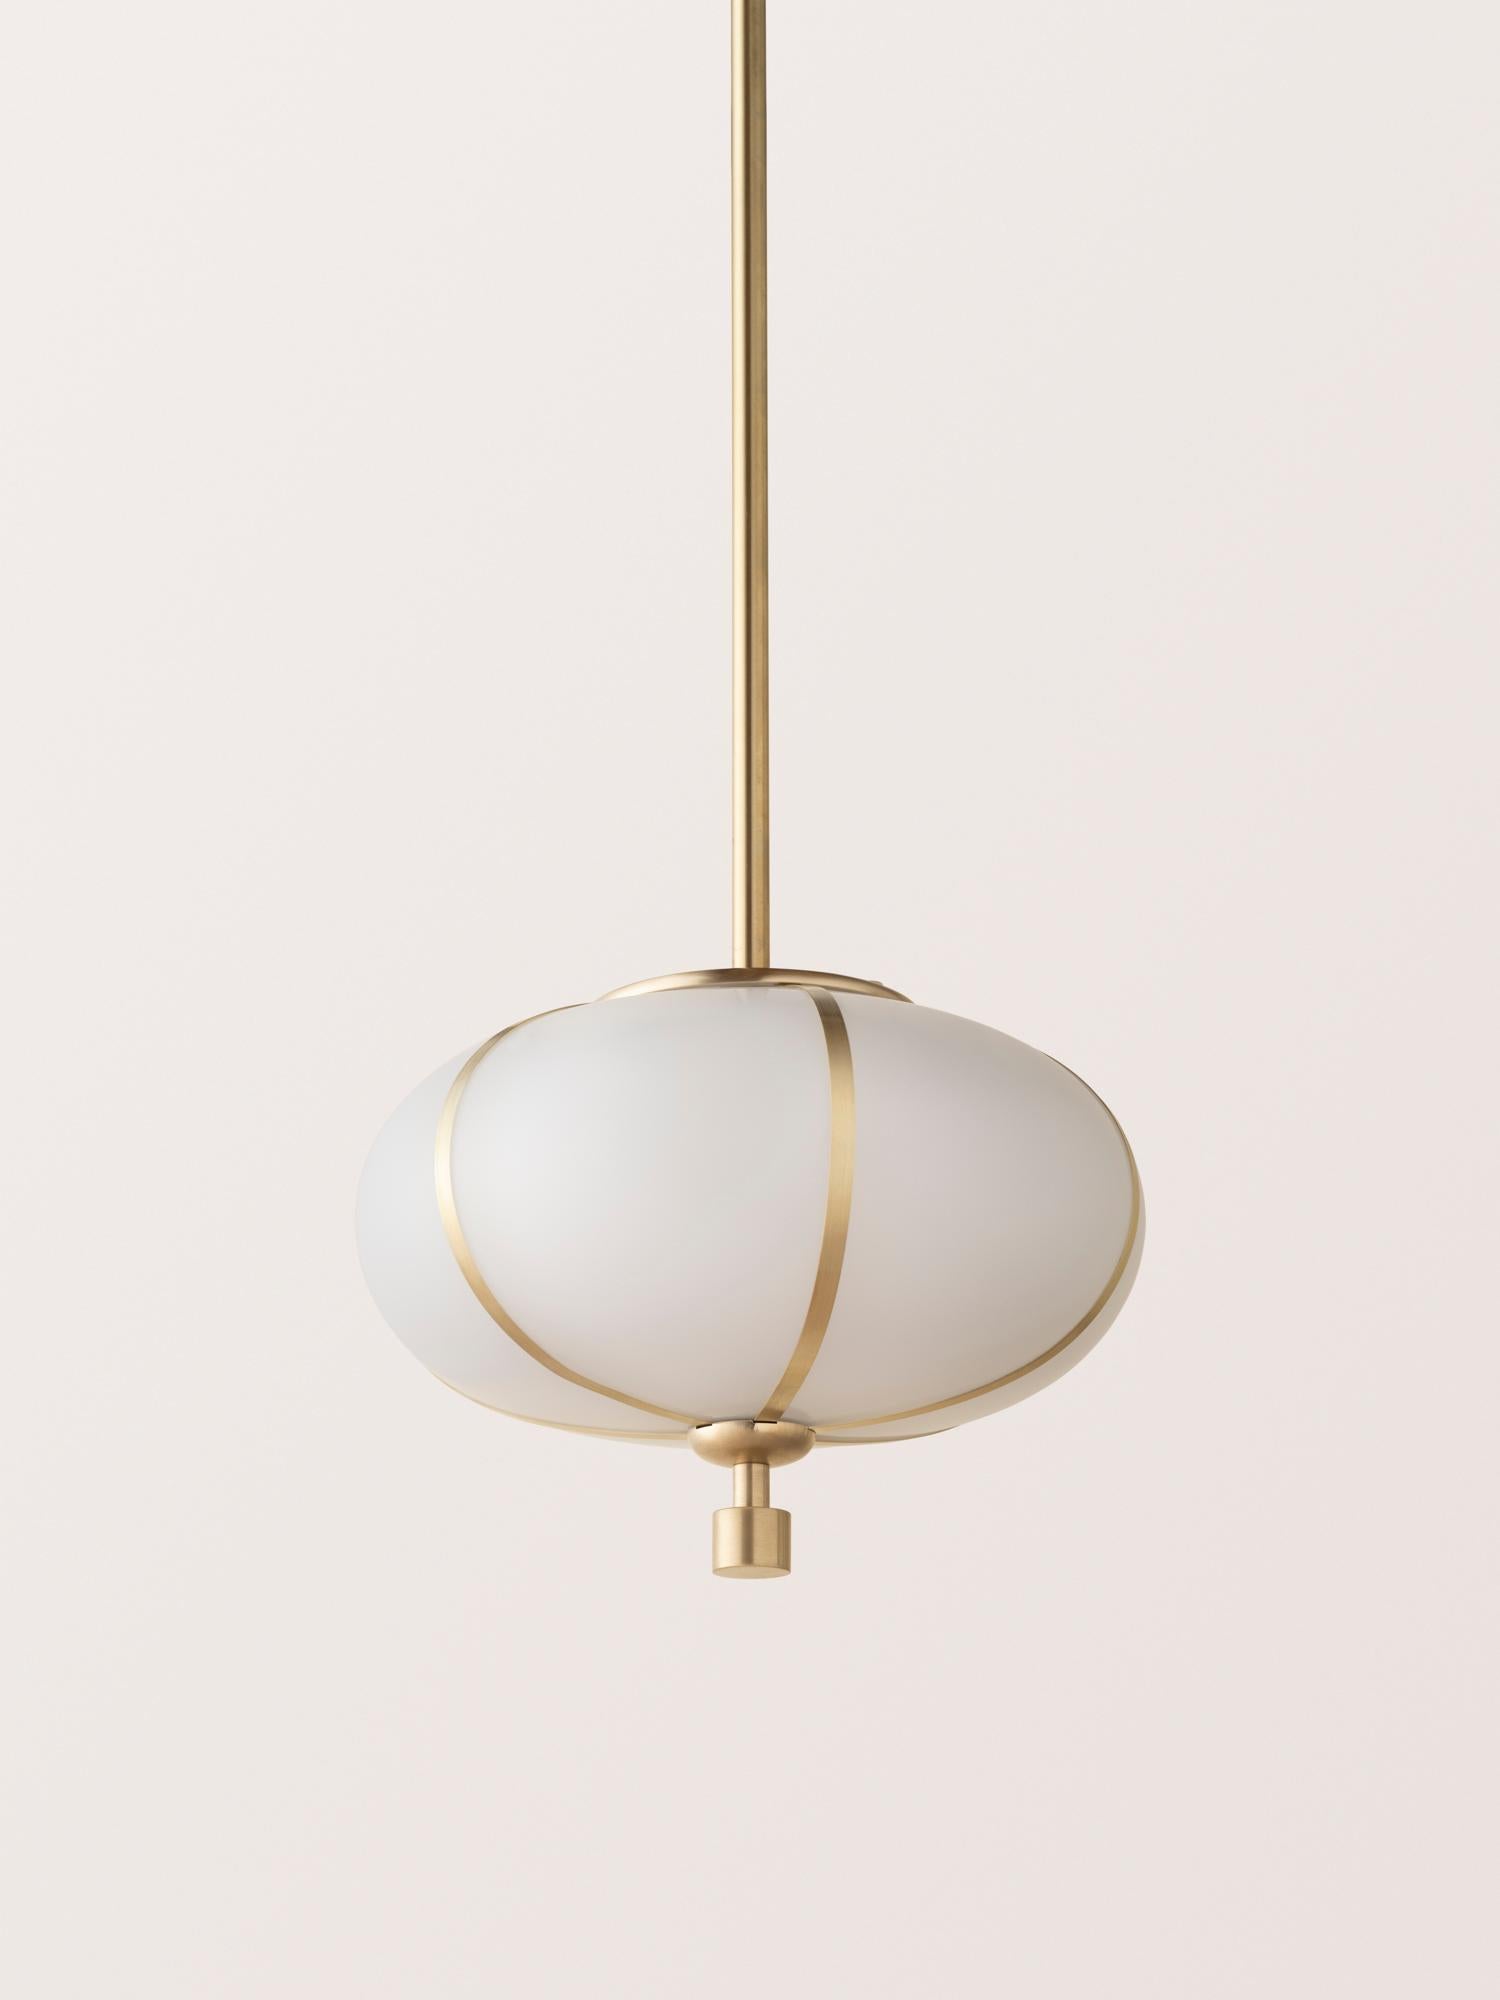 The Rib Pendant - Small Ellipse is blown in Italy and delicately framed by thin brass ribs. A cylindrical brass finial, with optional hand-wrapped leather or suede, elongates the fixture and adds a finishing touch of refinement.

This listing is